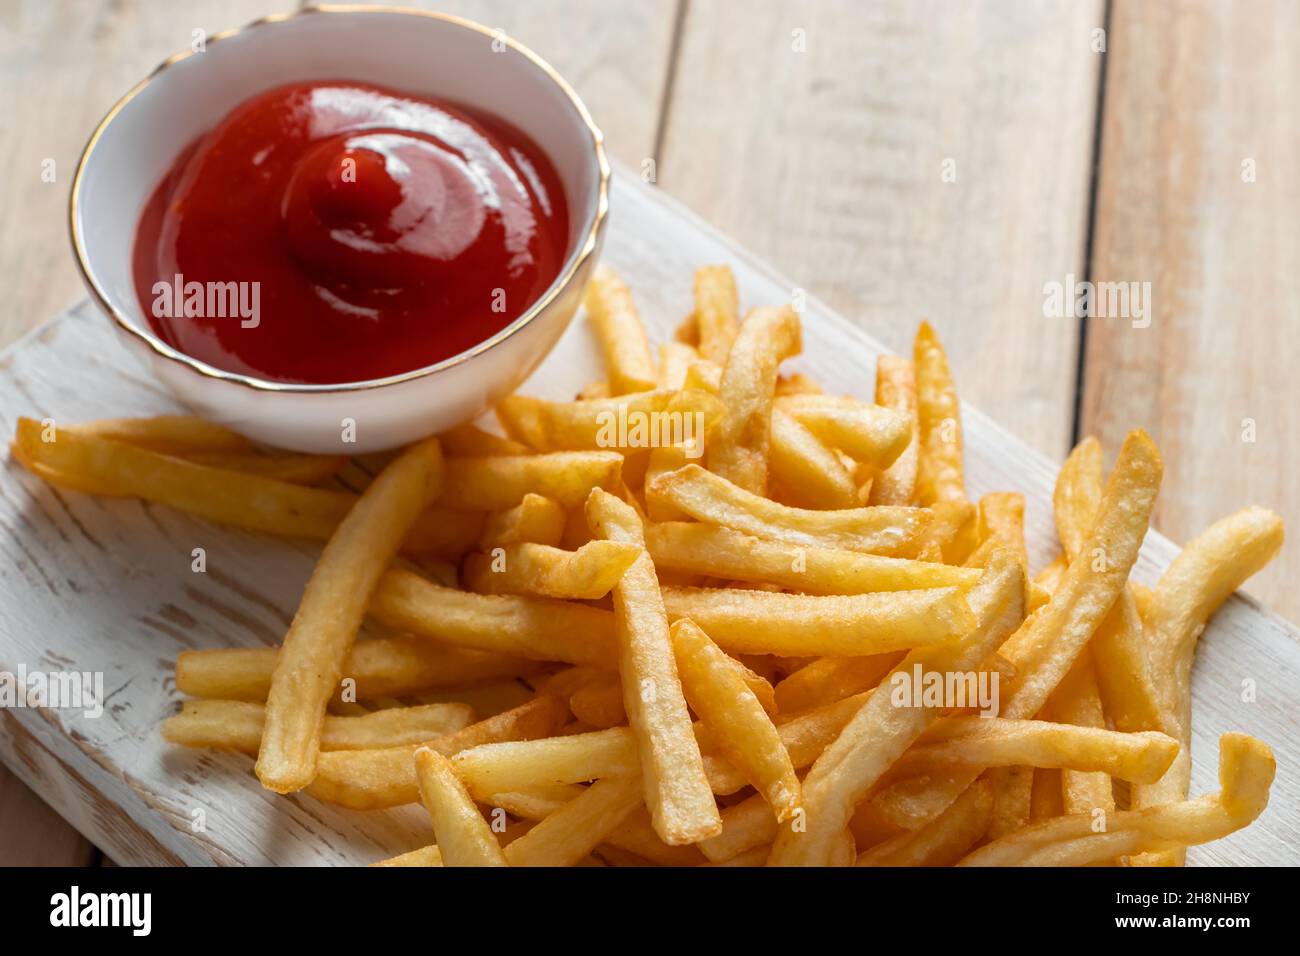 Hot golden french fries with ketchup on wooden background. Tasty american fast food. Place for text Stock Photo